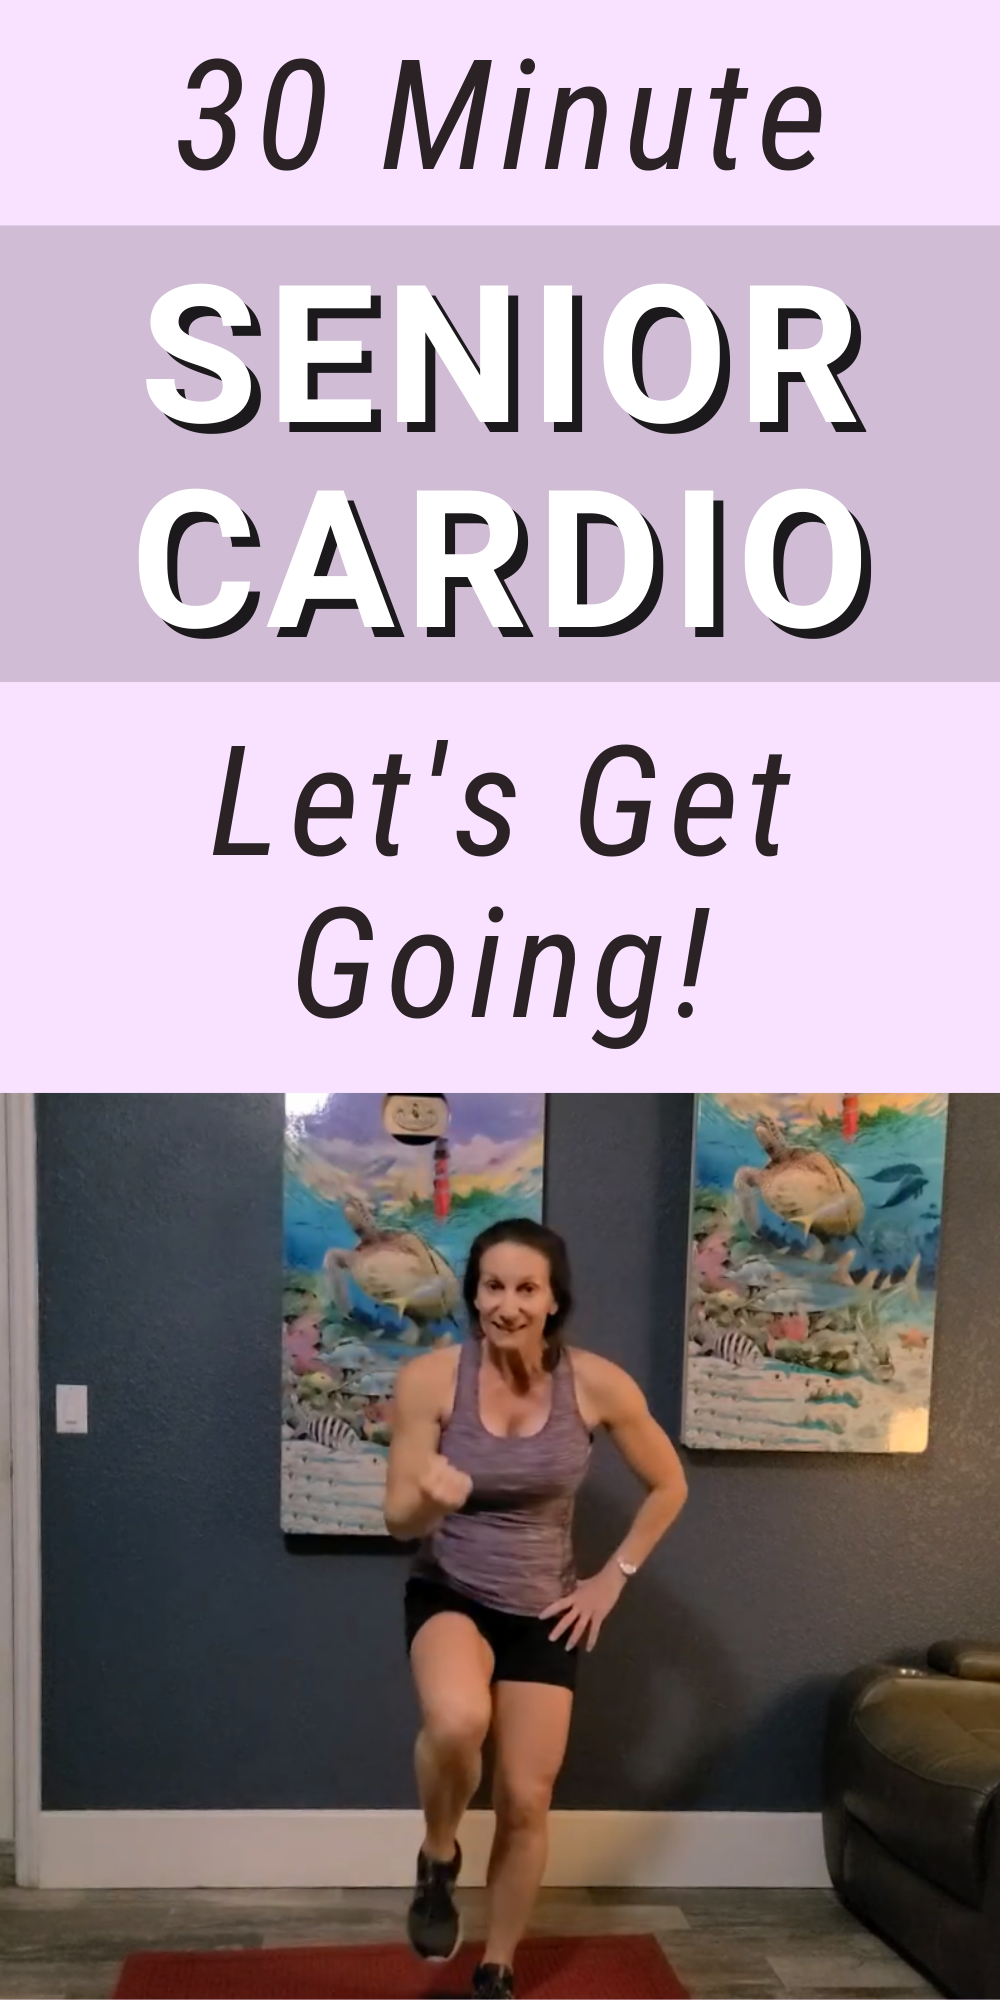 30 minute cardio workout video for seniors